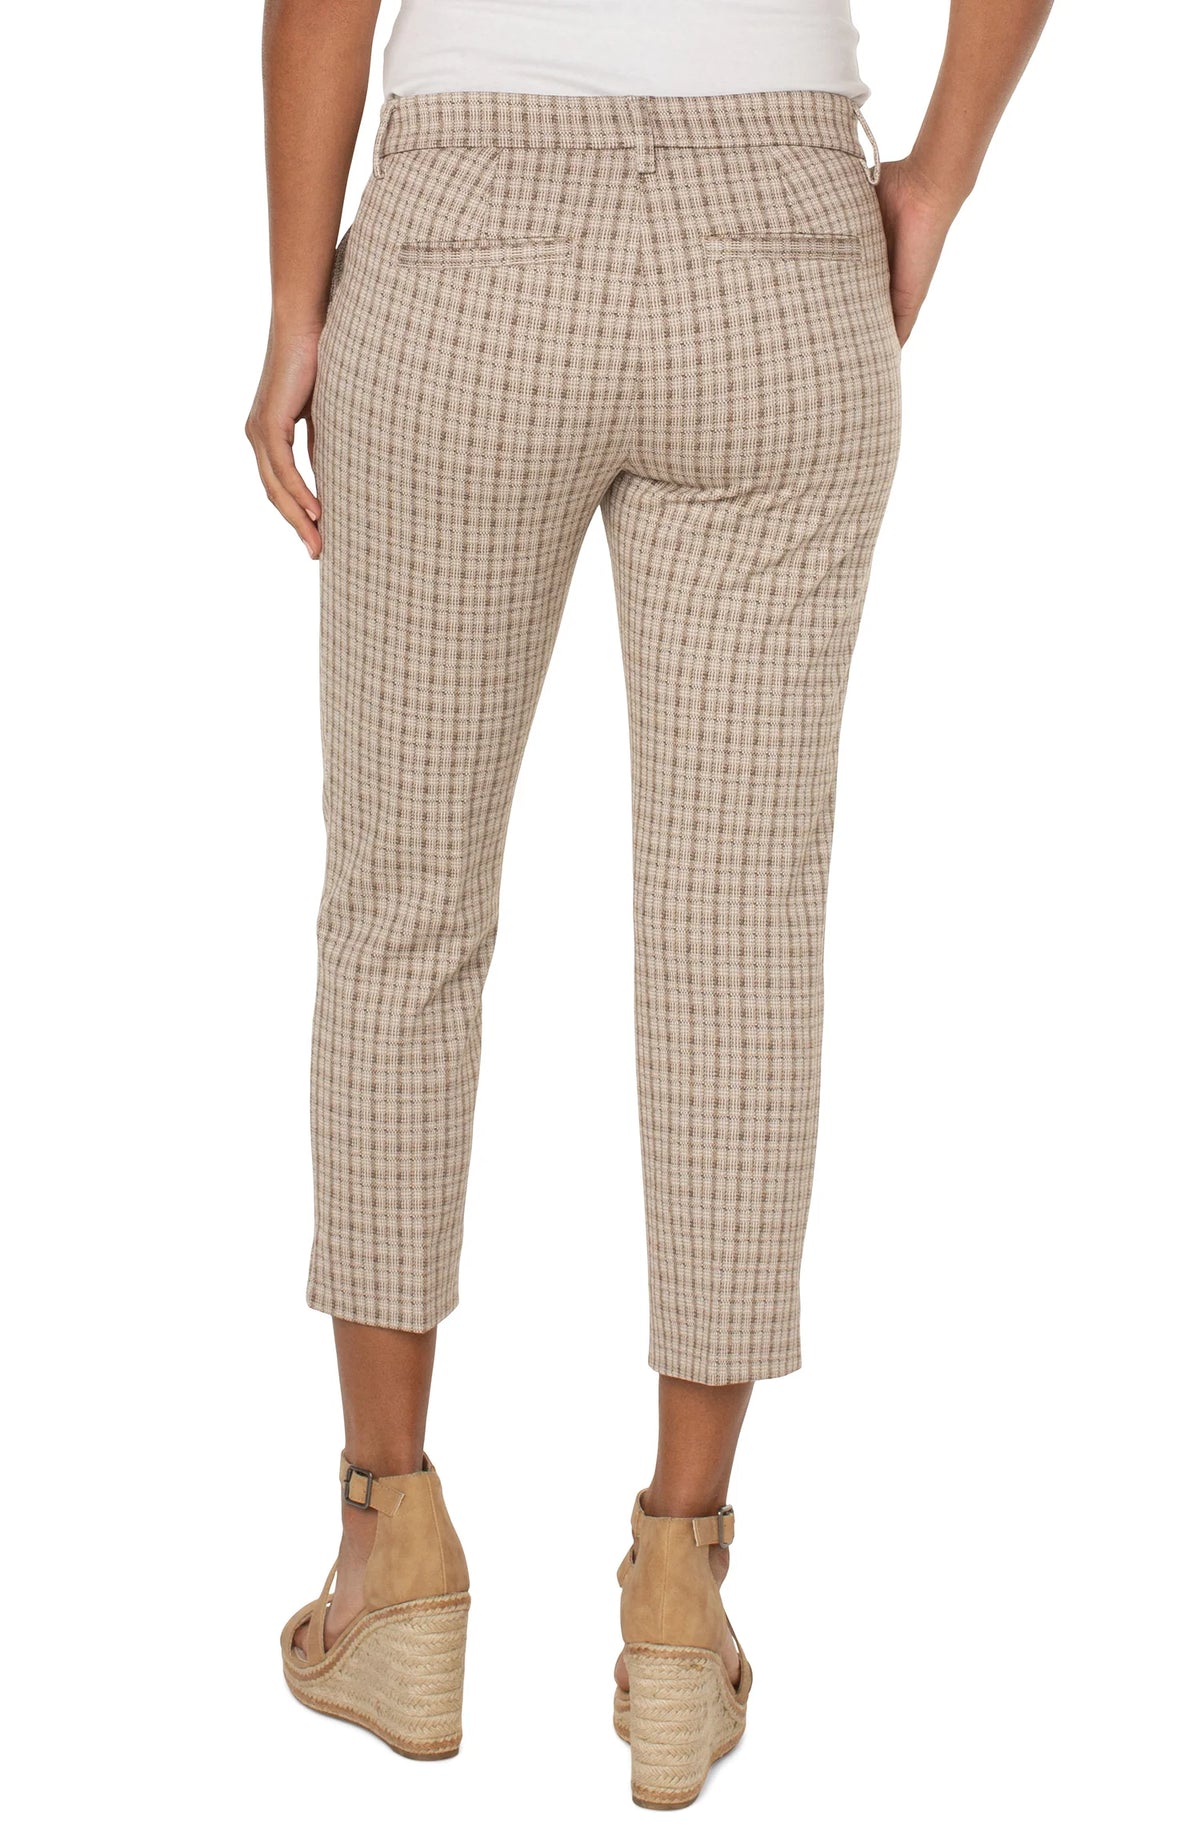 Kelsey Knit Crop with Slit Trouser | Capuccino Plaid